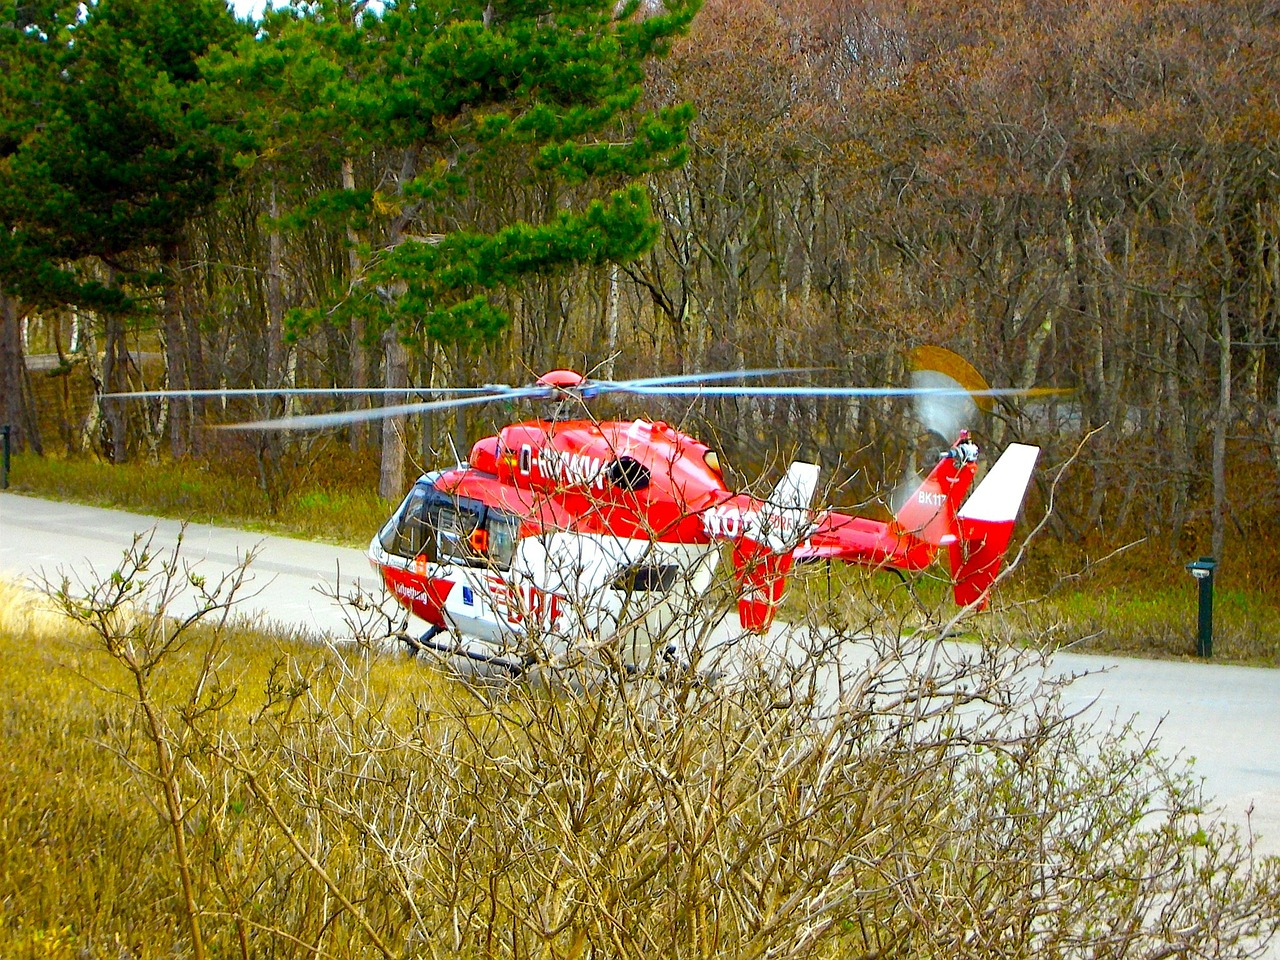 rescue rescue helicopter aviation free photo